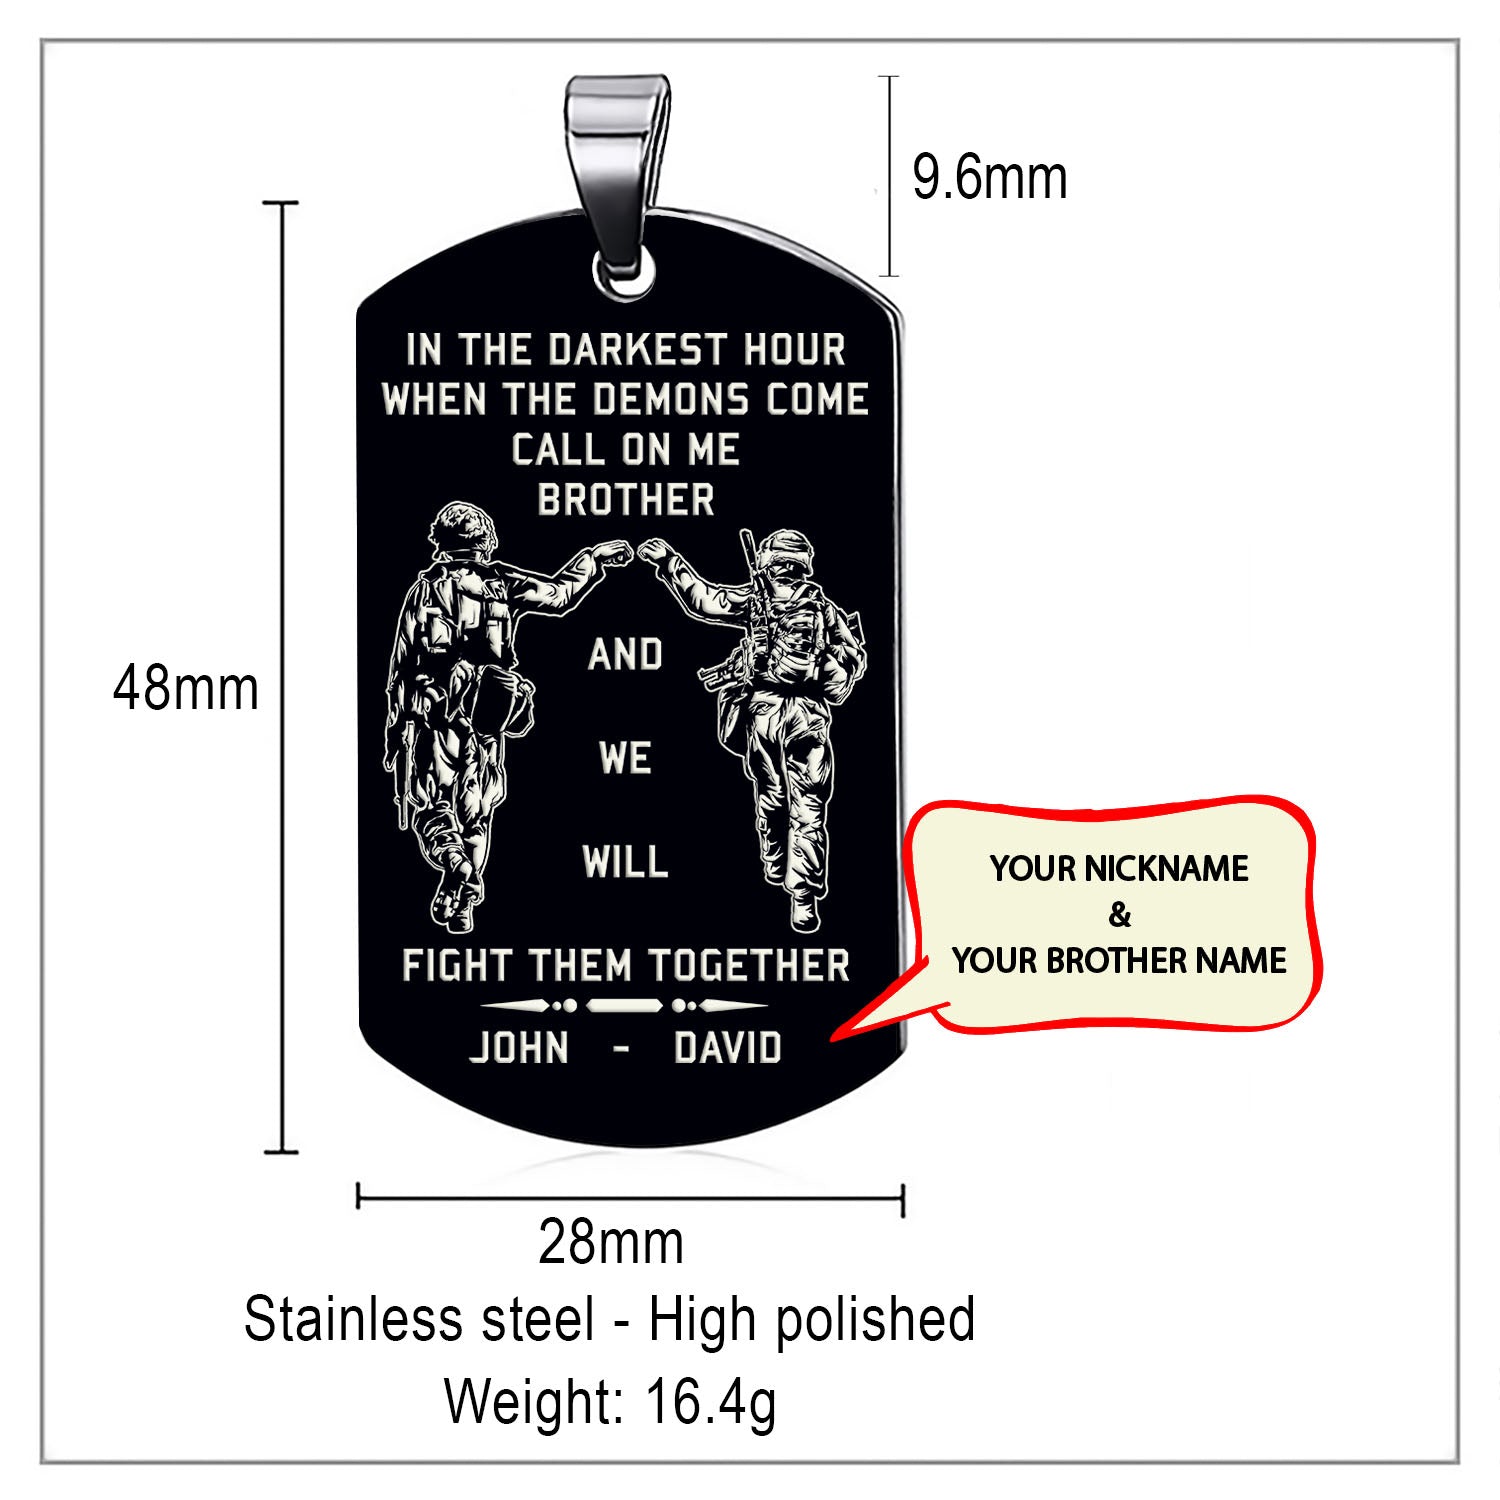 Customizable engraved dog tag gift from brother, In the darkest hour, When the demons come call on me brother and we will fight them together